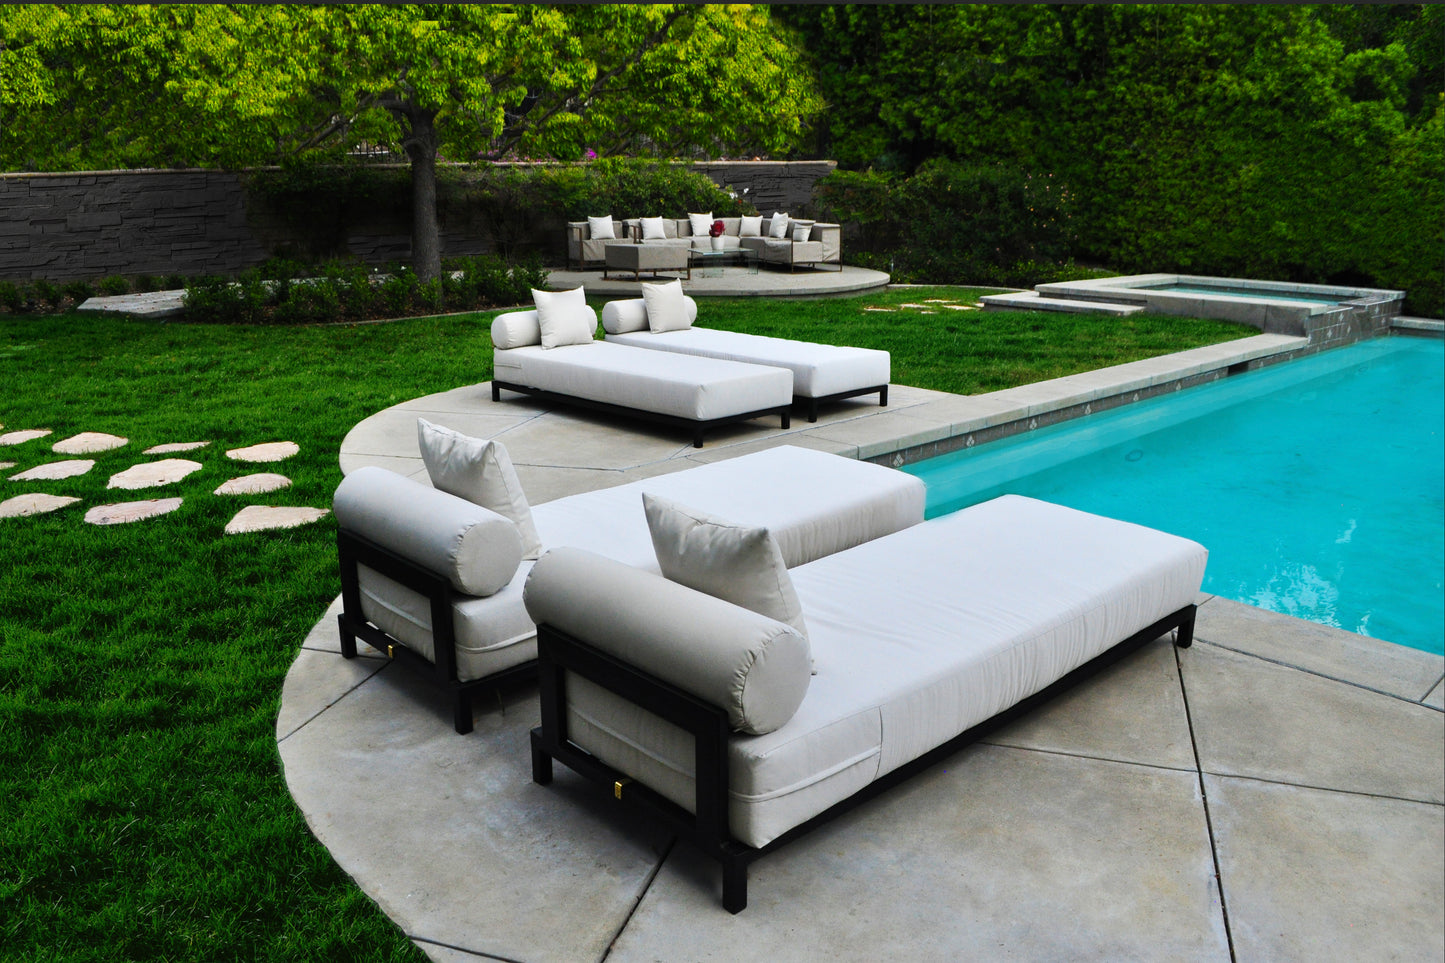 Volantes Outdoor White Chaise Loungers (Set of 4)